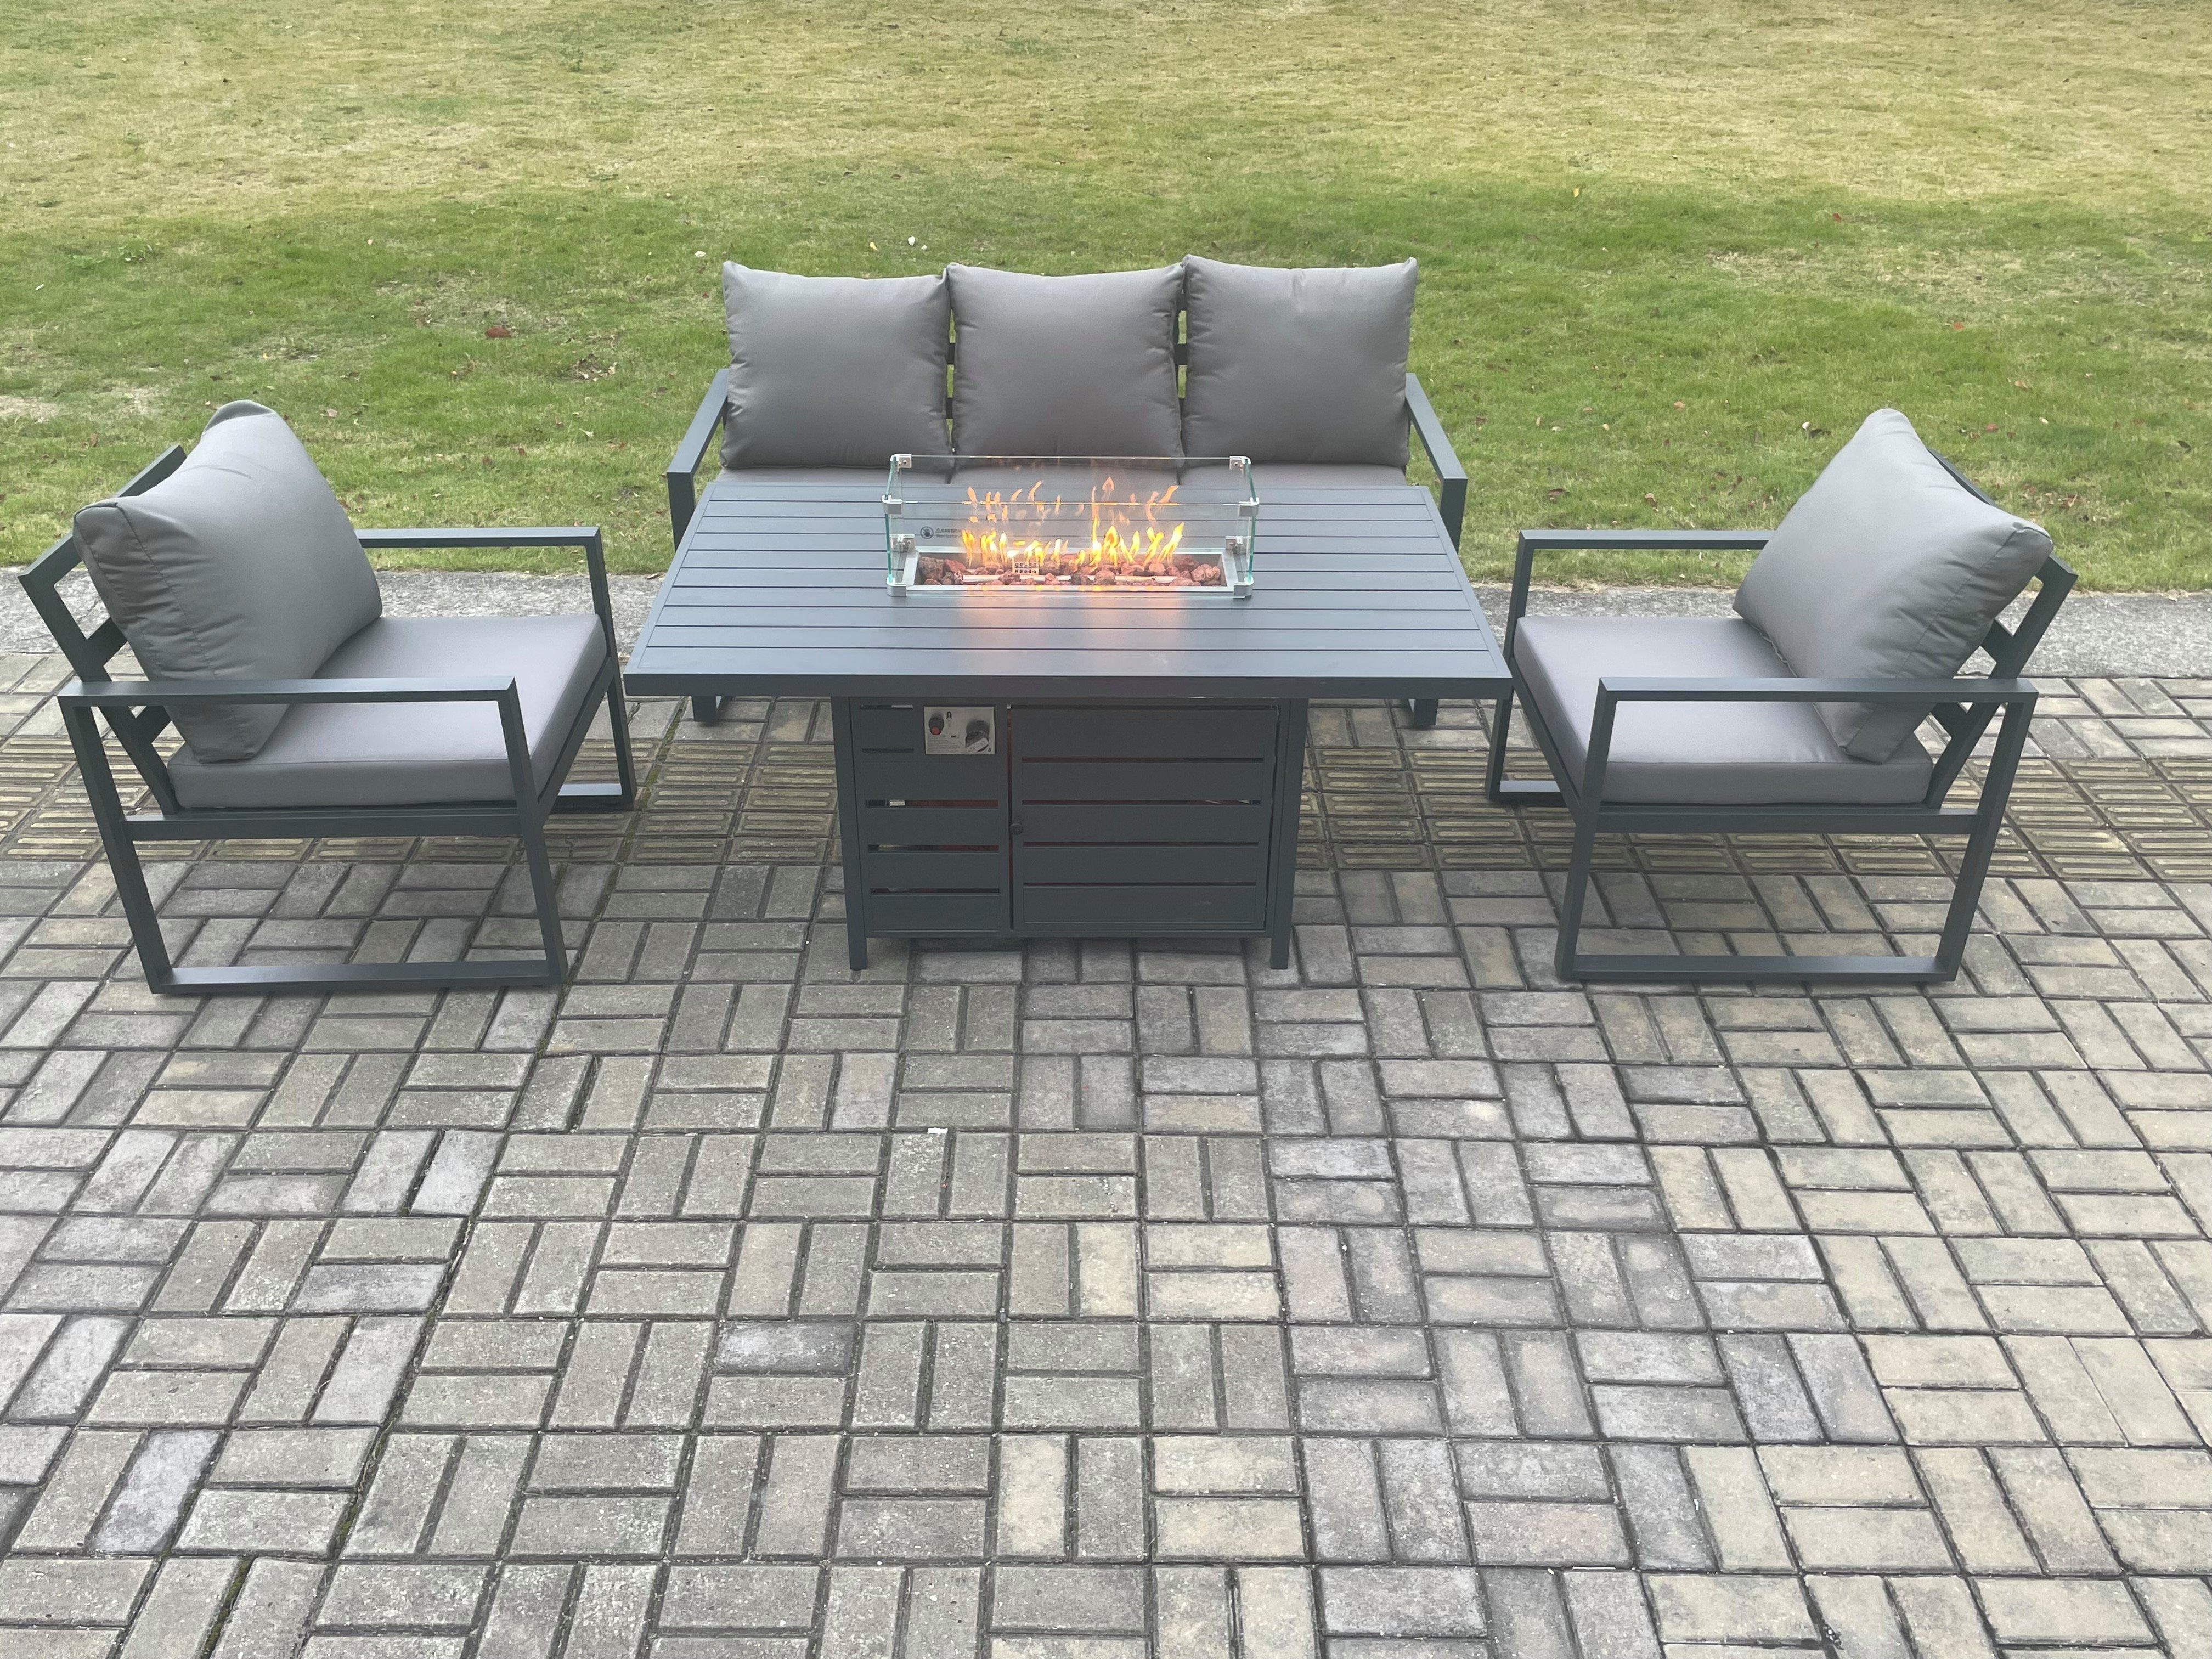 Aluminium Outdoor Garden Furniture Set Gas Fire Pit Dining Table Set Gas Heater Burner with 2 Arm Ch